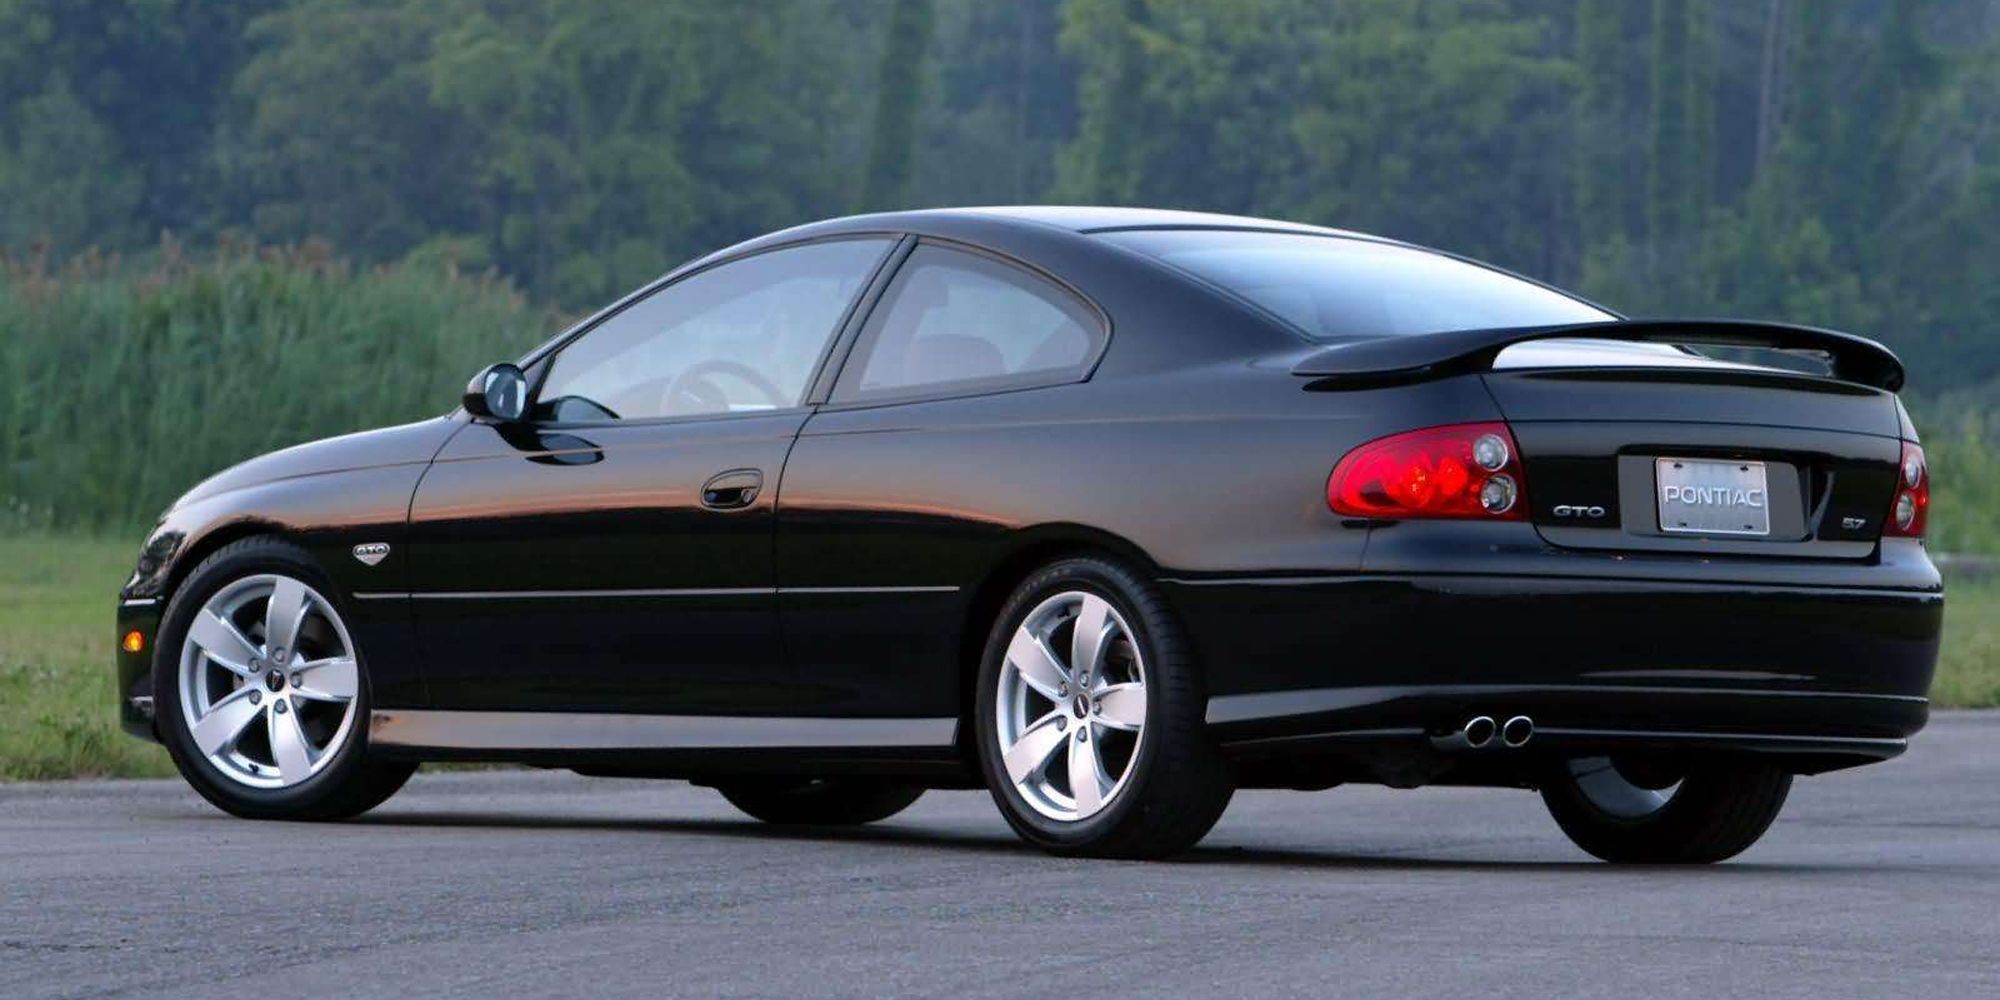 Rear 3/4 view of the 2004 GTO